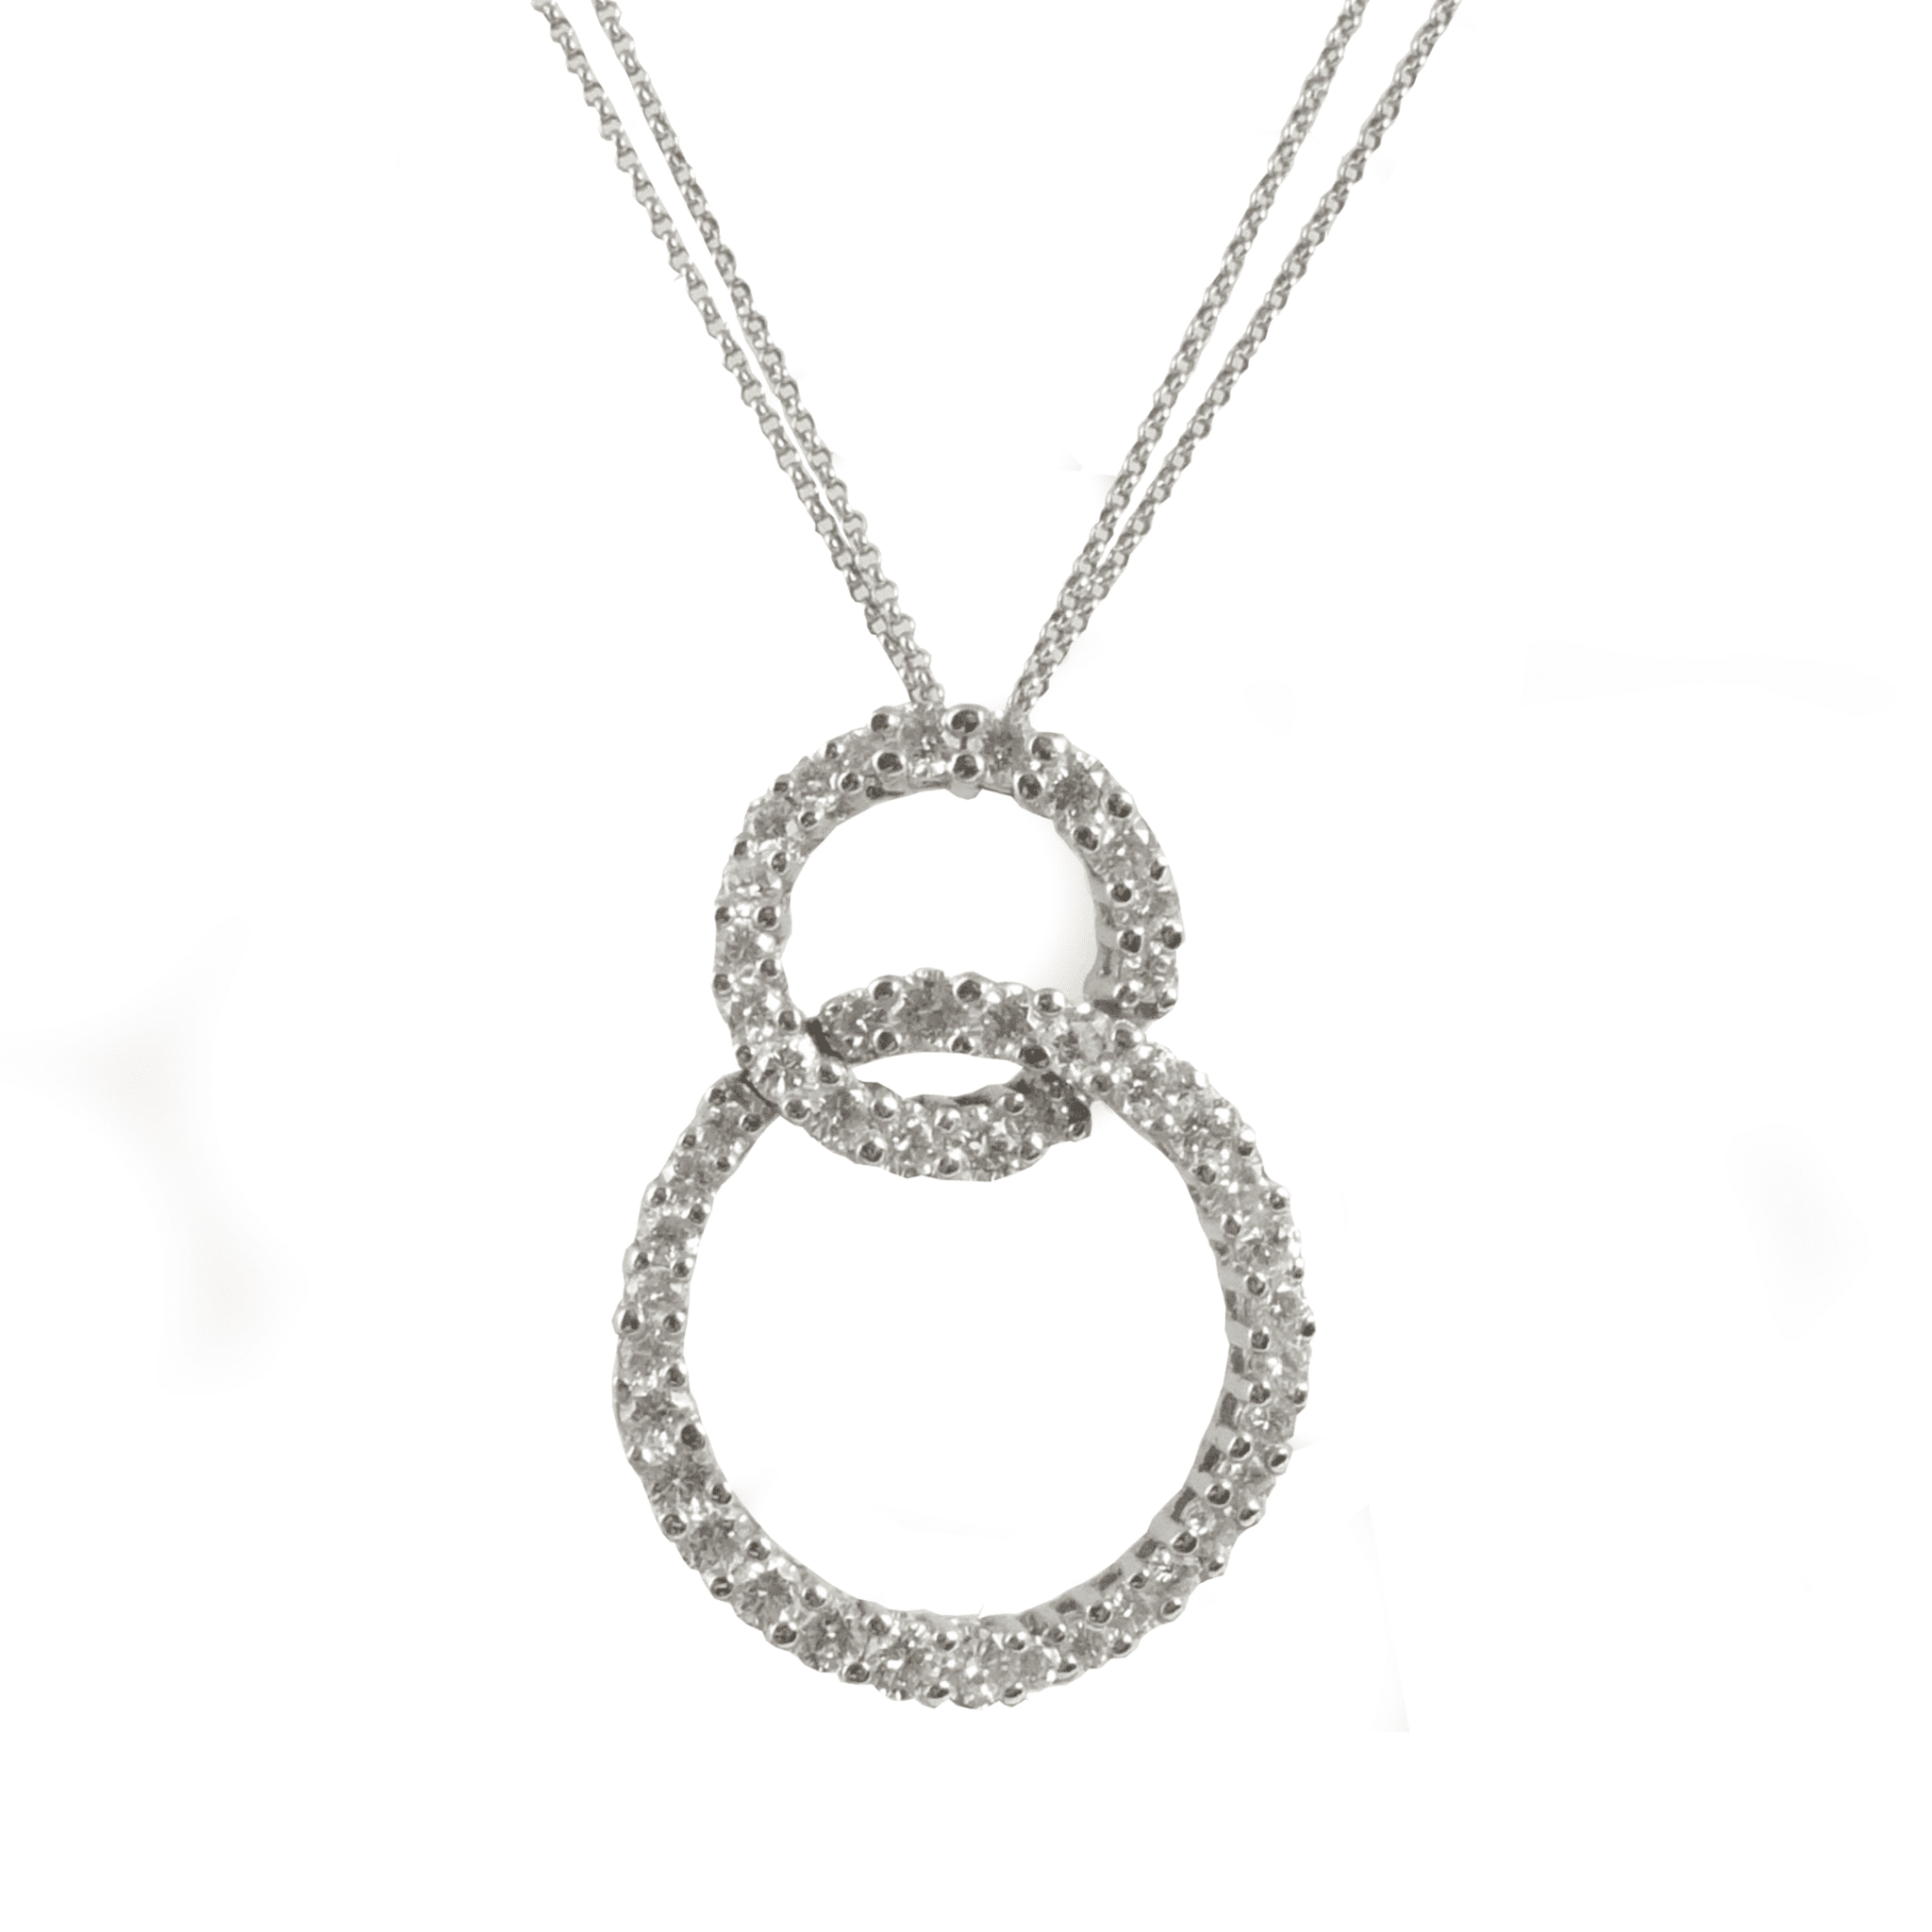 Canadian Diamond Solitaire Pendant in 18k White Gold (1/3 ct. tw.)